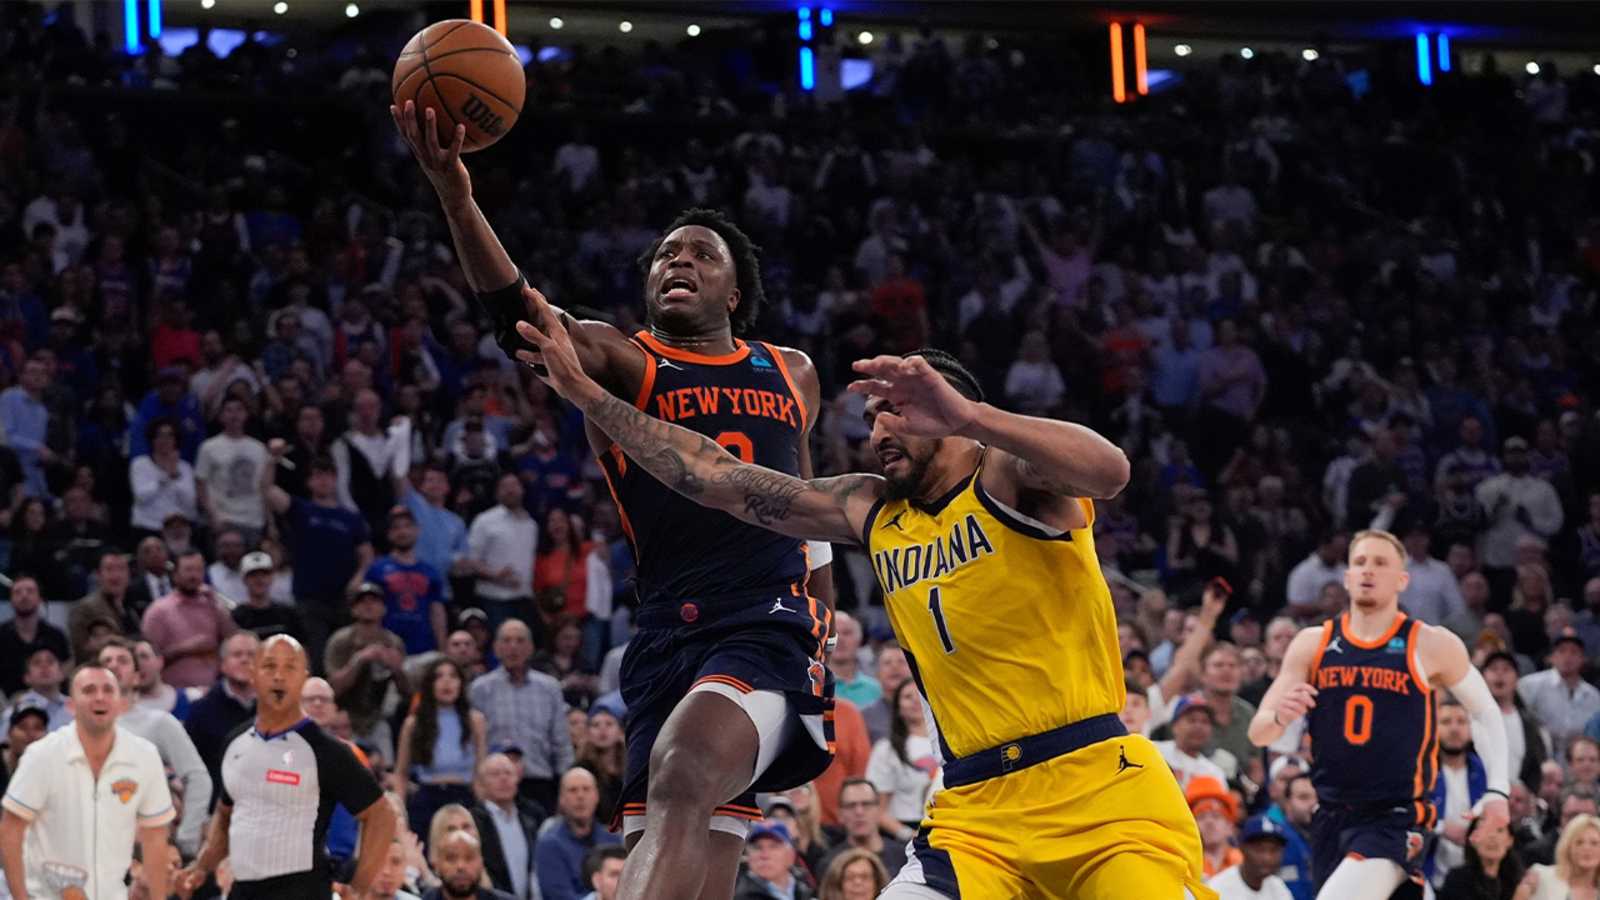 New York Knicks try to advance in the NBA playoffs in Game 7 against Indiana Pacers [Video]